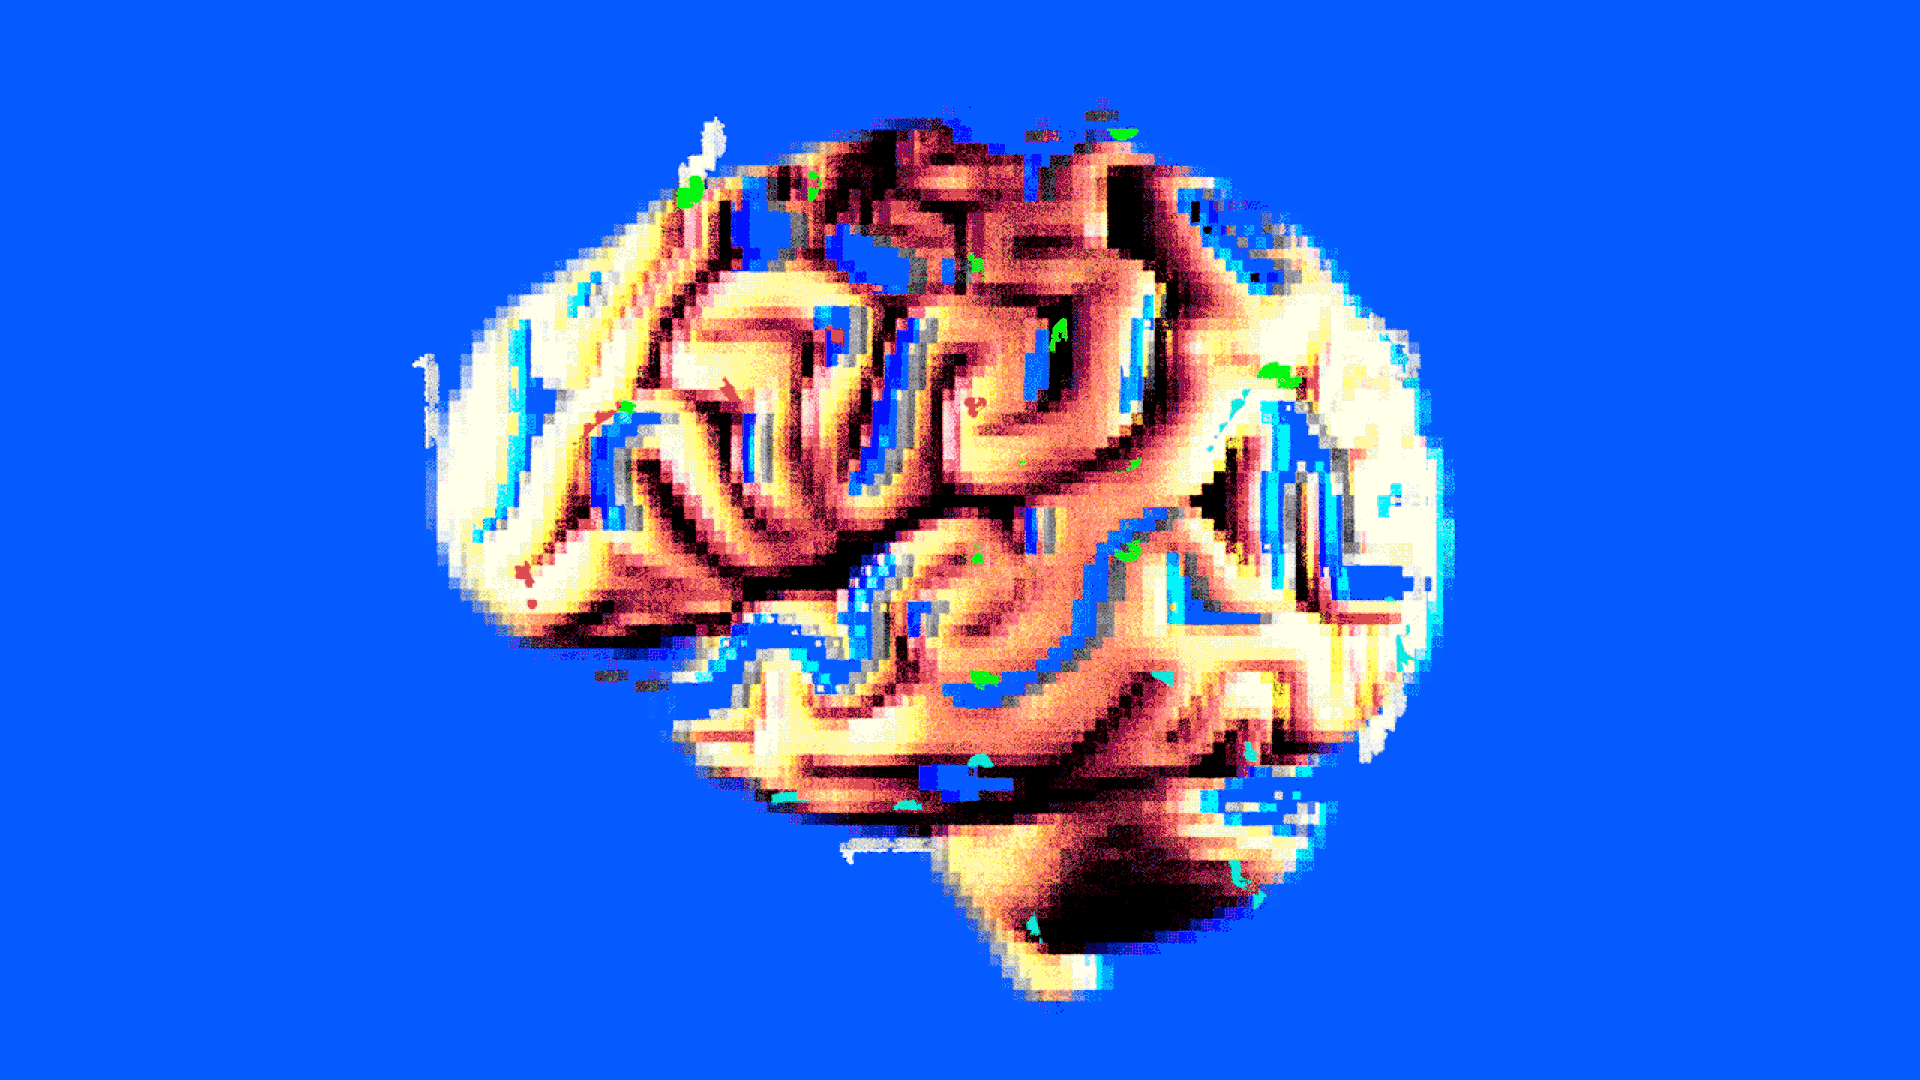 A pixelated illustration of a brain vibrates in place and is blurry